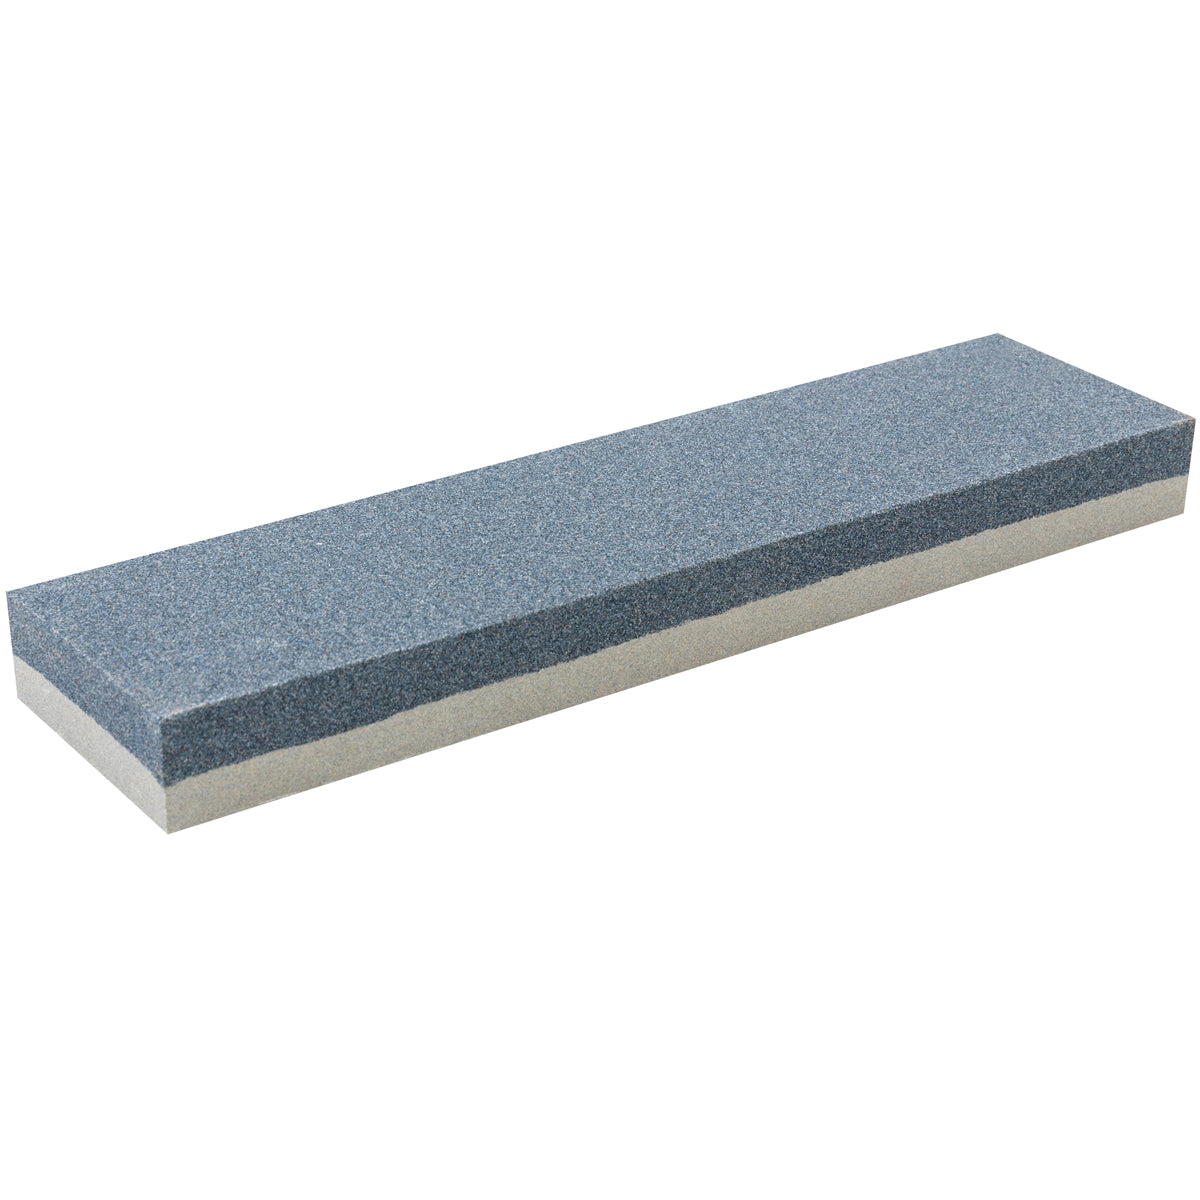 8 Dual Grit Combination Sharpening Stone